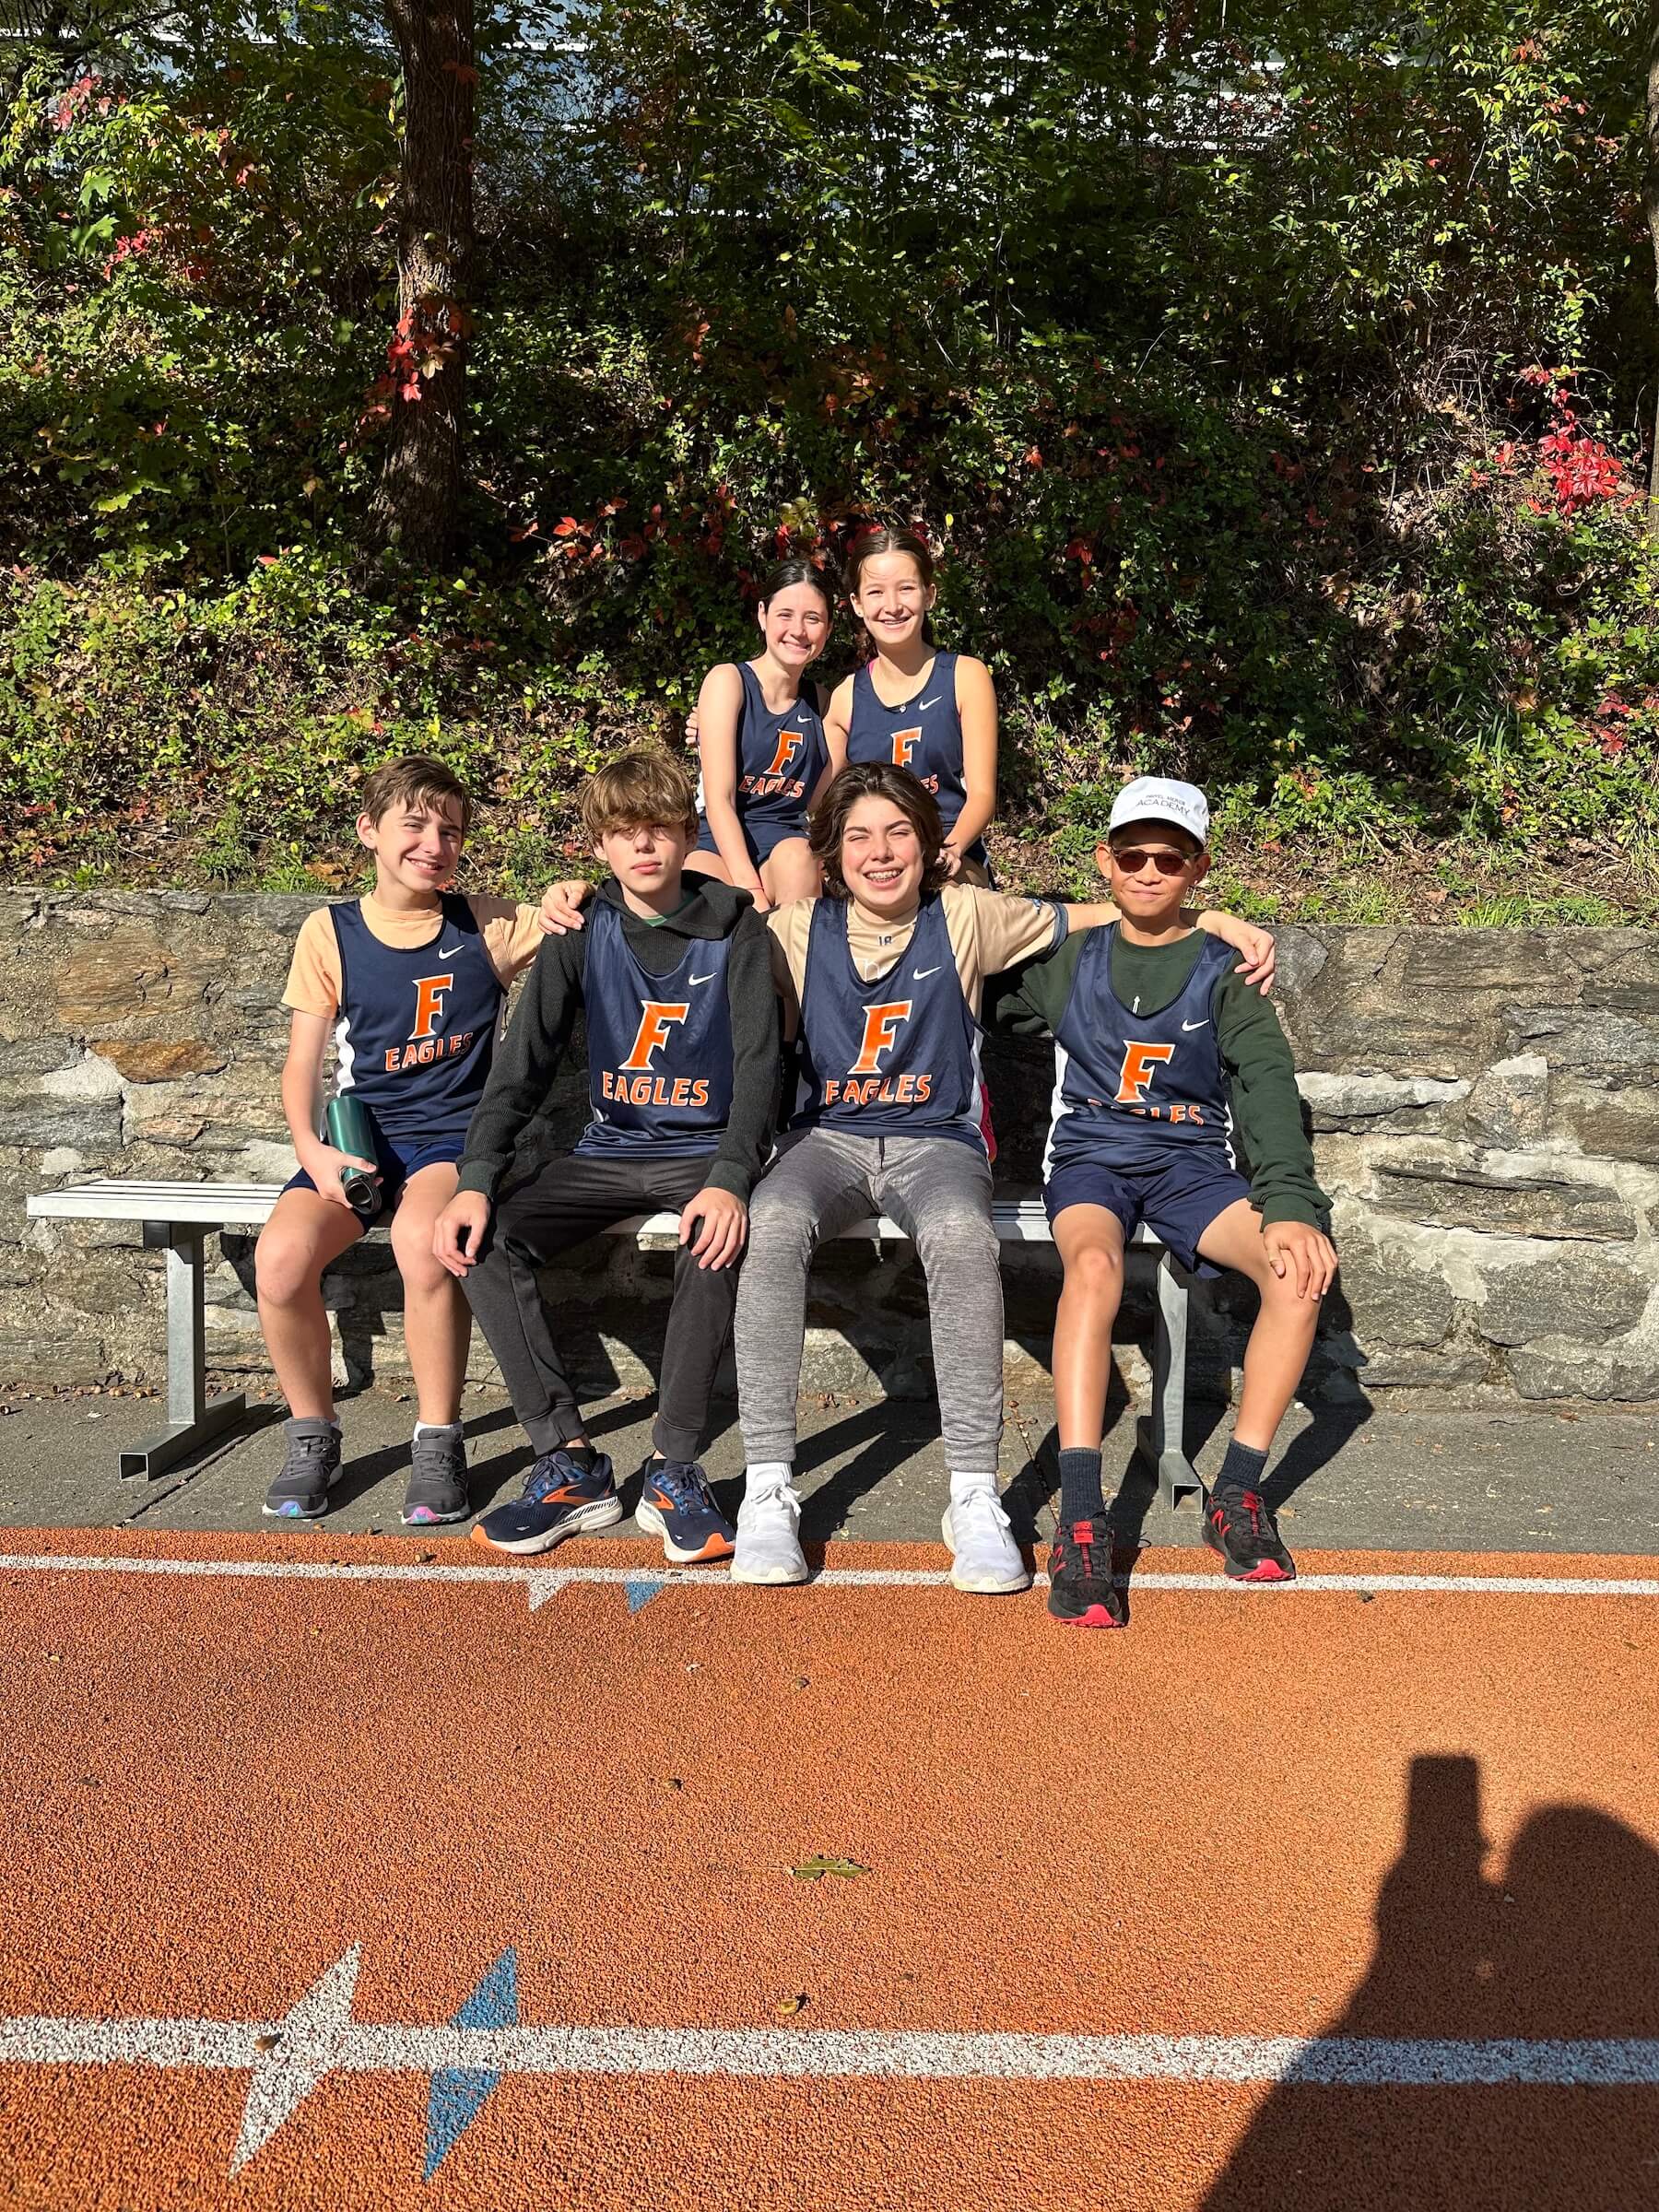 Ethical Culture Fieldston School_Feel Good Photos_Middle School track team sits on bench for team photo